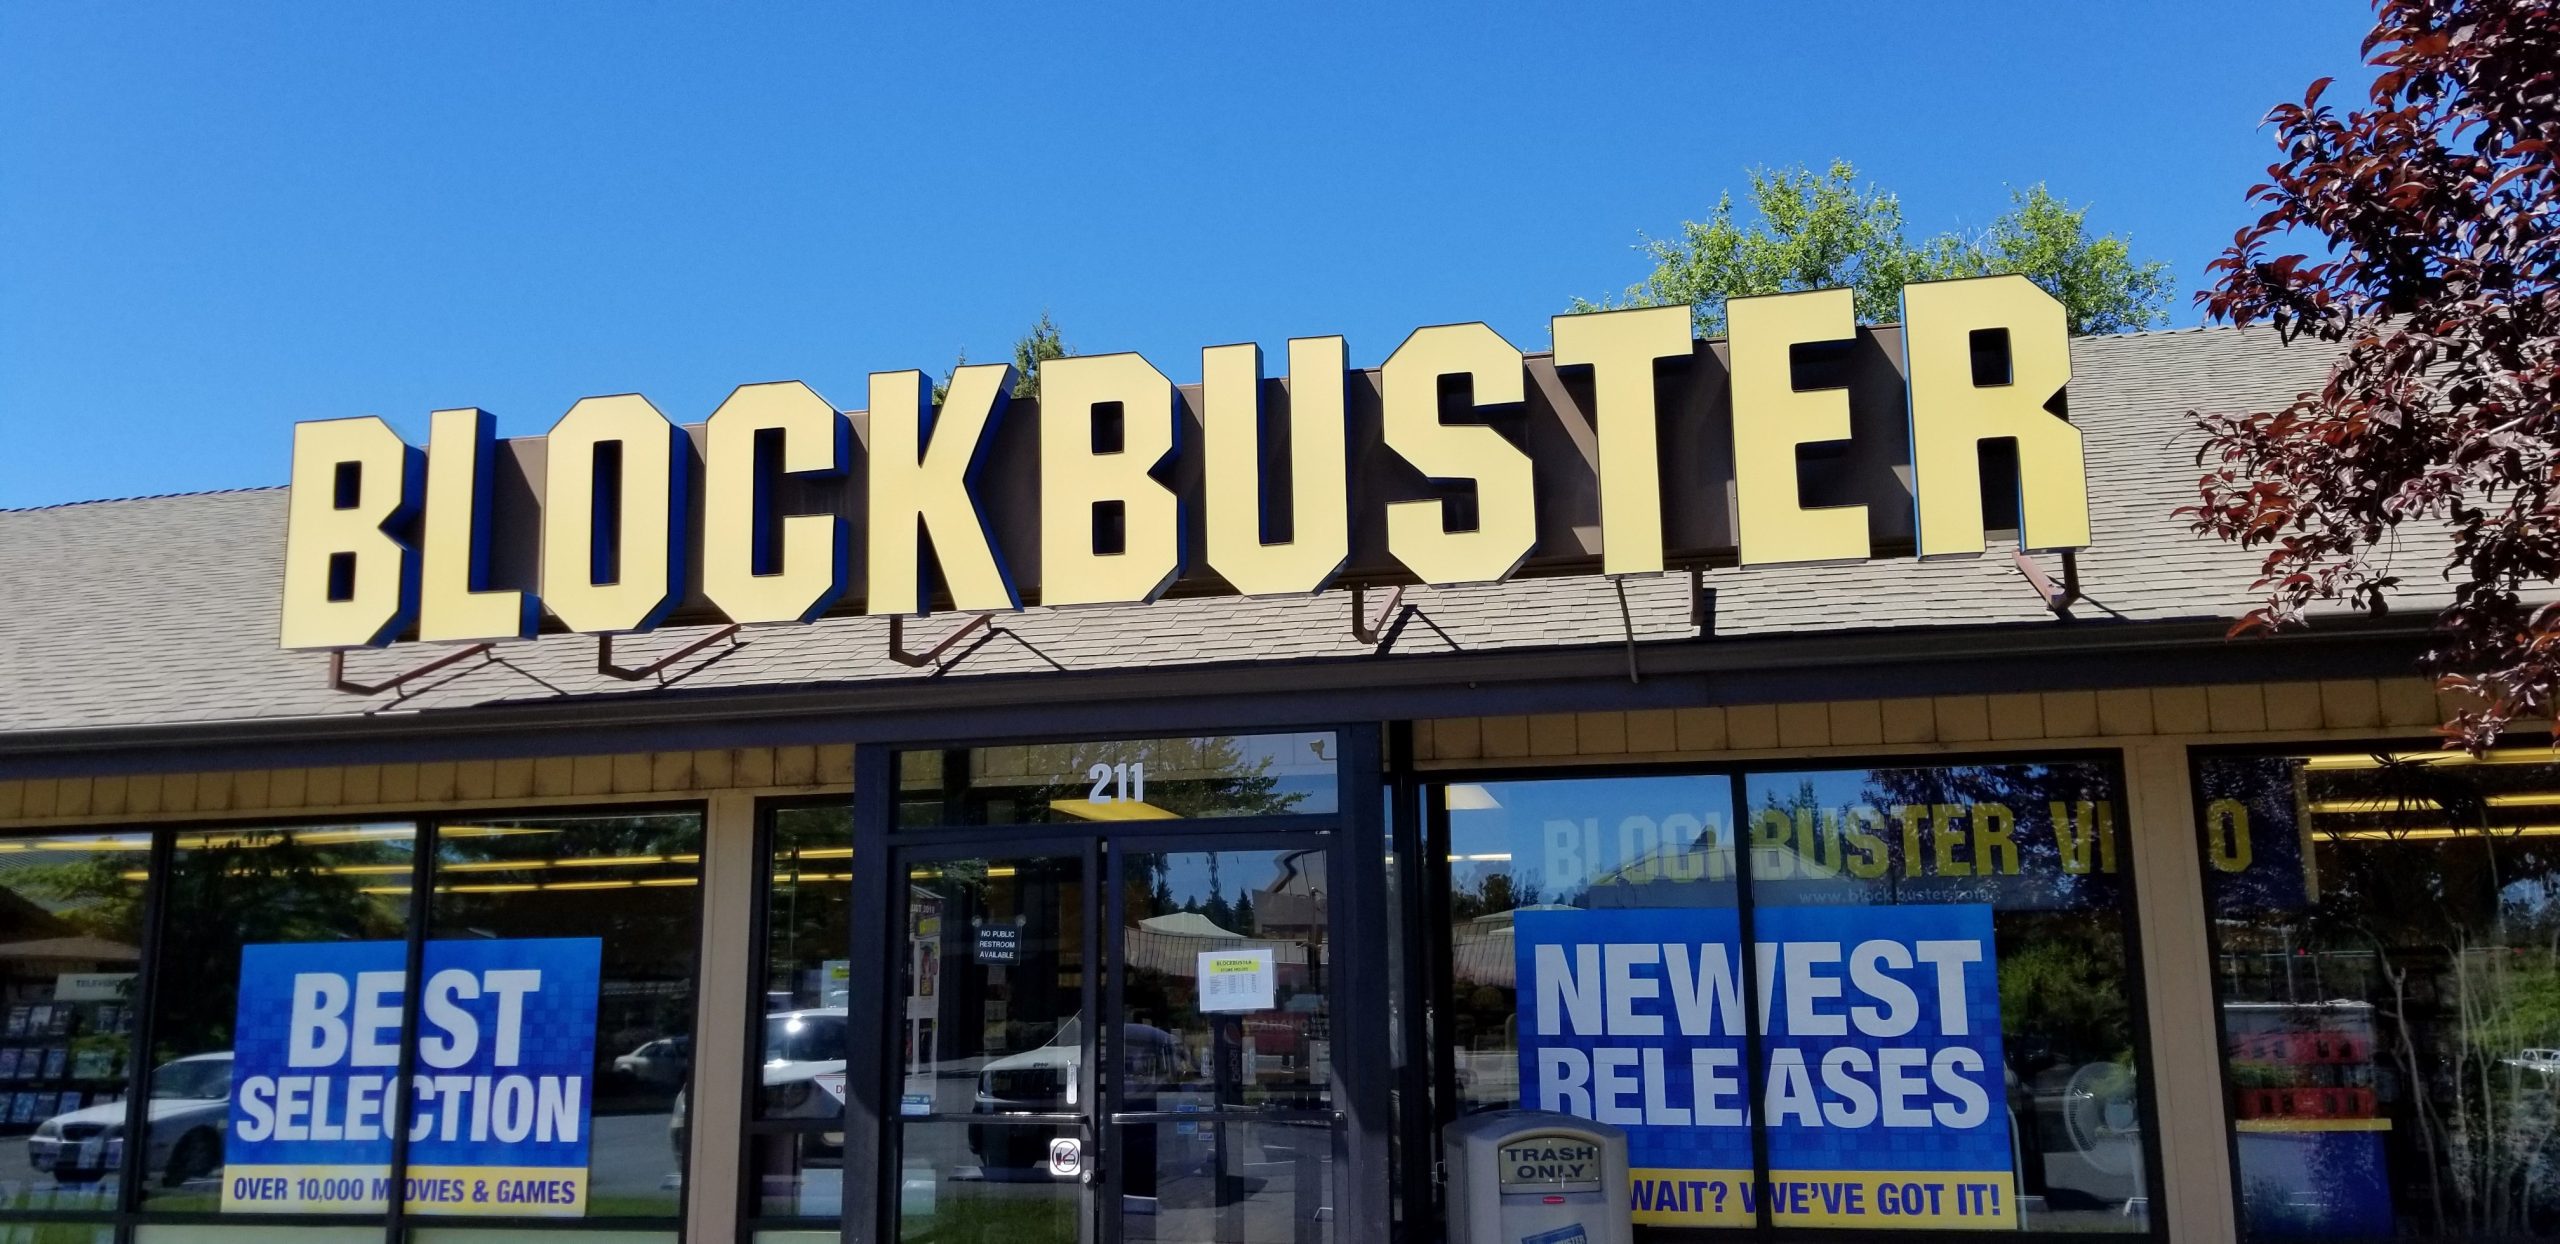 The facade of the last remaining Blockbuster in Bend, Oregon (USA).